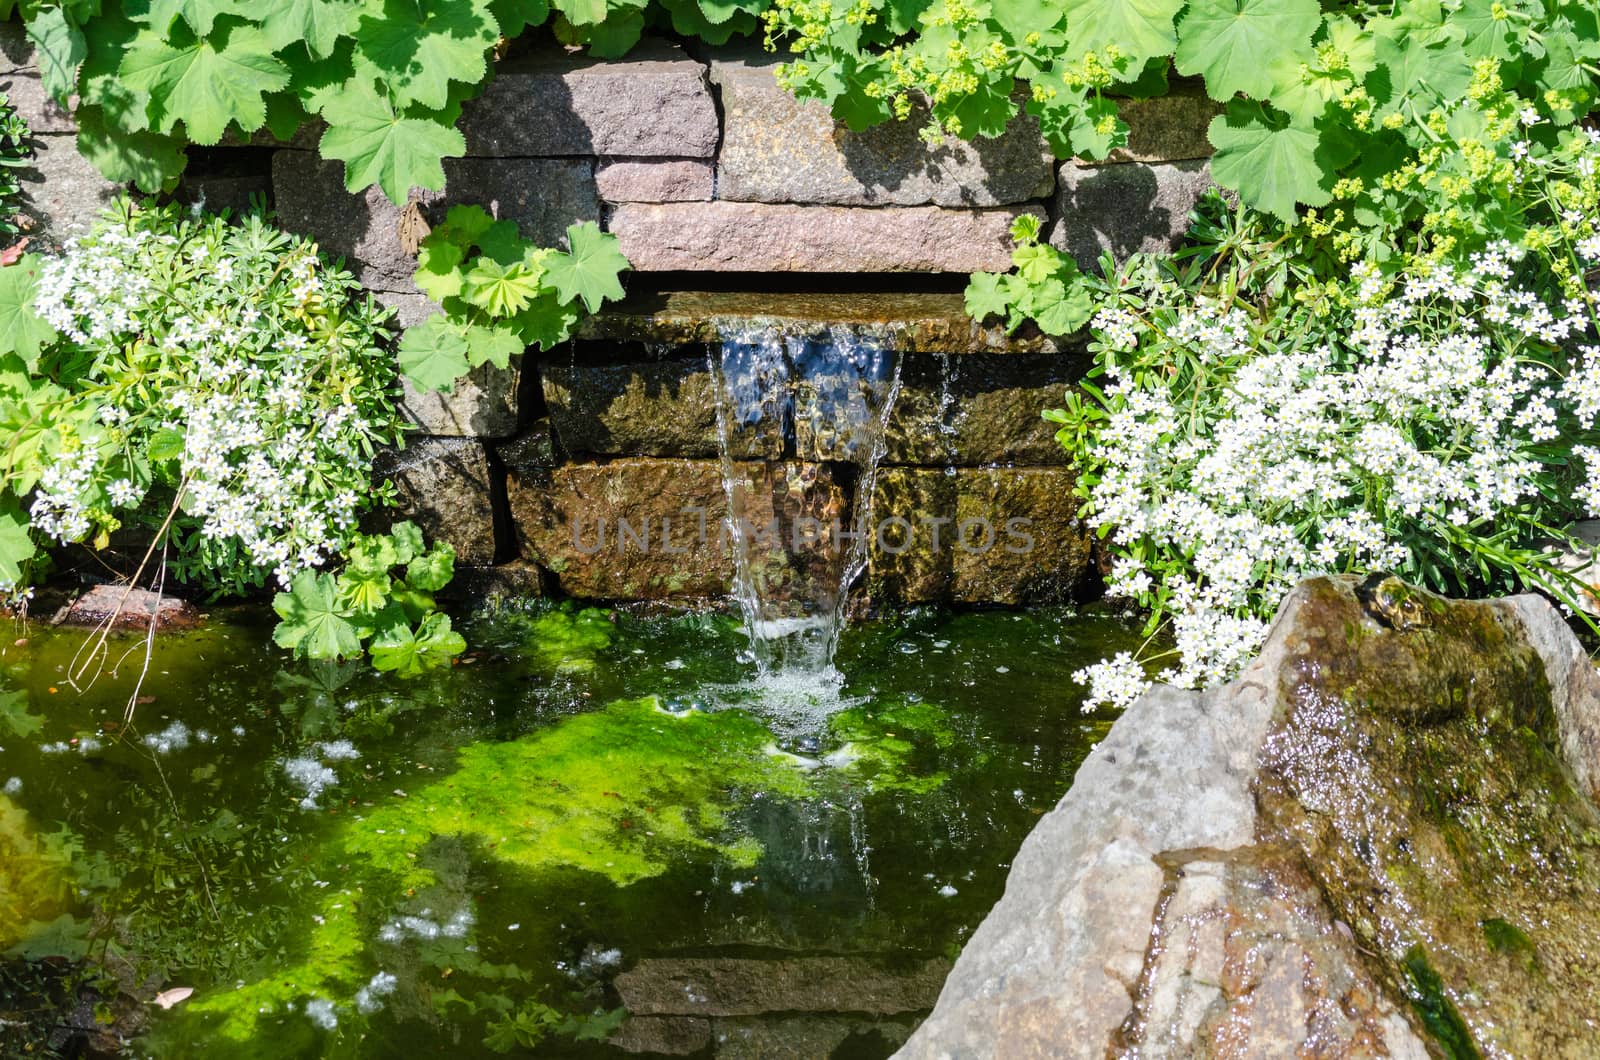 Overlooking a small waterfall and garden pond.
